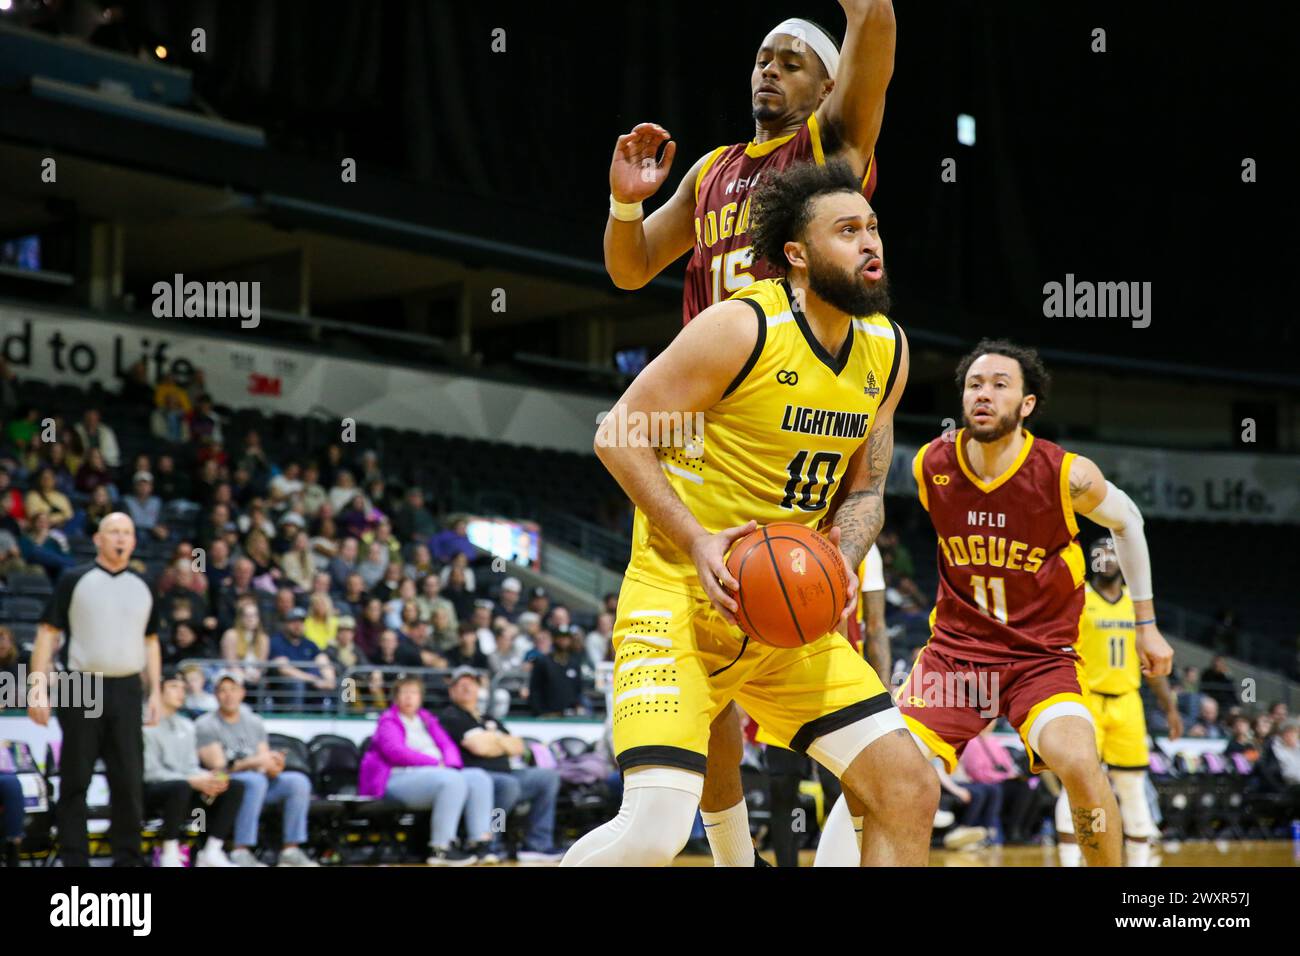 London, Canada. 1st Apr, 2024. The London Lightning defeat the Newfoundland Rogues 104-97 in regulation. Jermaine Haley (10) of the London Lightning drives the net under pressure from Marquise Collins (15) of the Newfoundland Rogues. Credit: Luke Durda/Alamy Live News Stock Photo